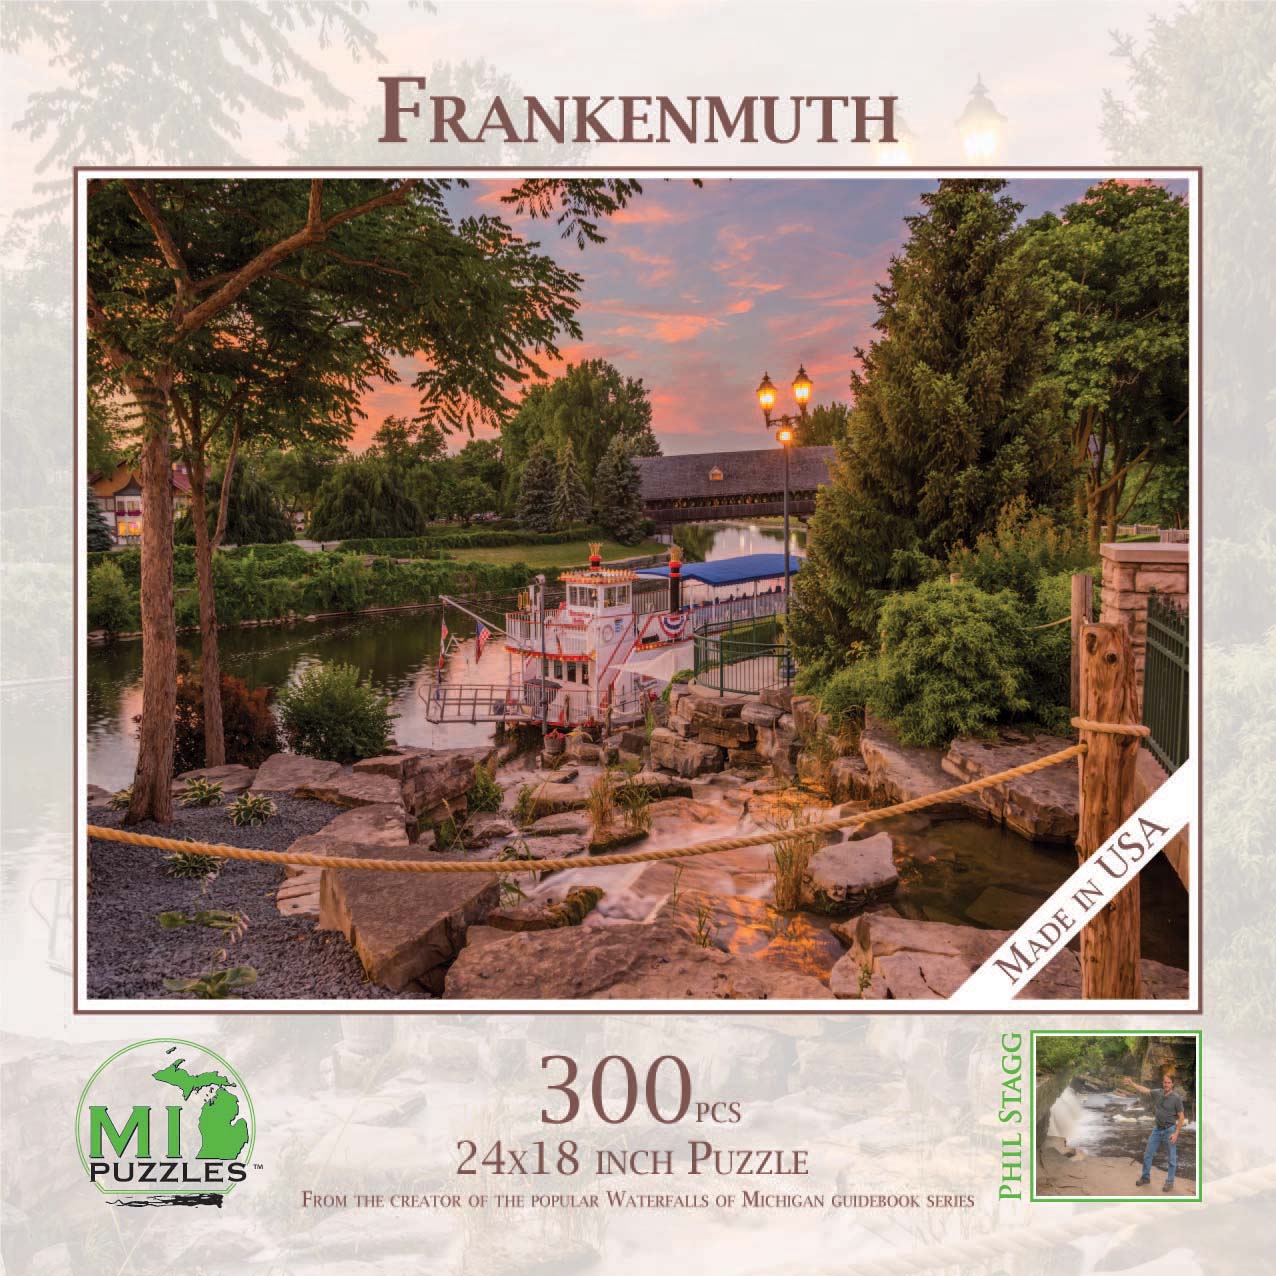 Frankenmuth Boat Jigsaw Puzzle